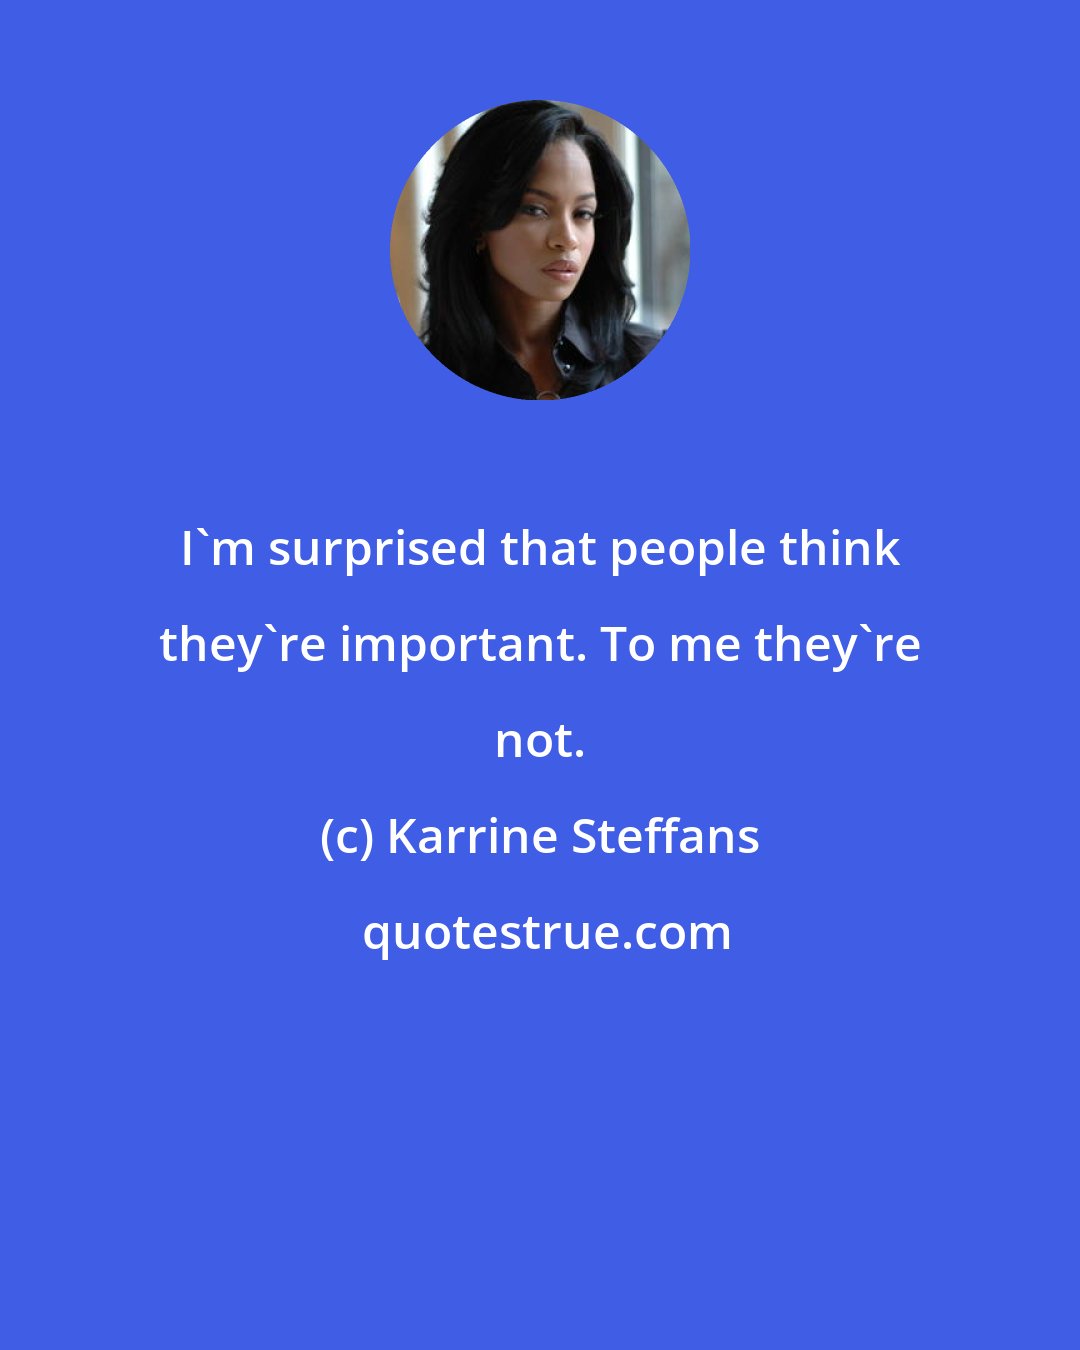 Karrine Steffans: I'm surprised that people think they're important. To me they're not.